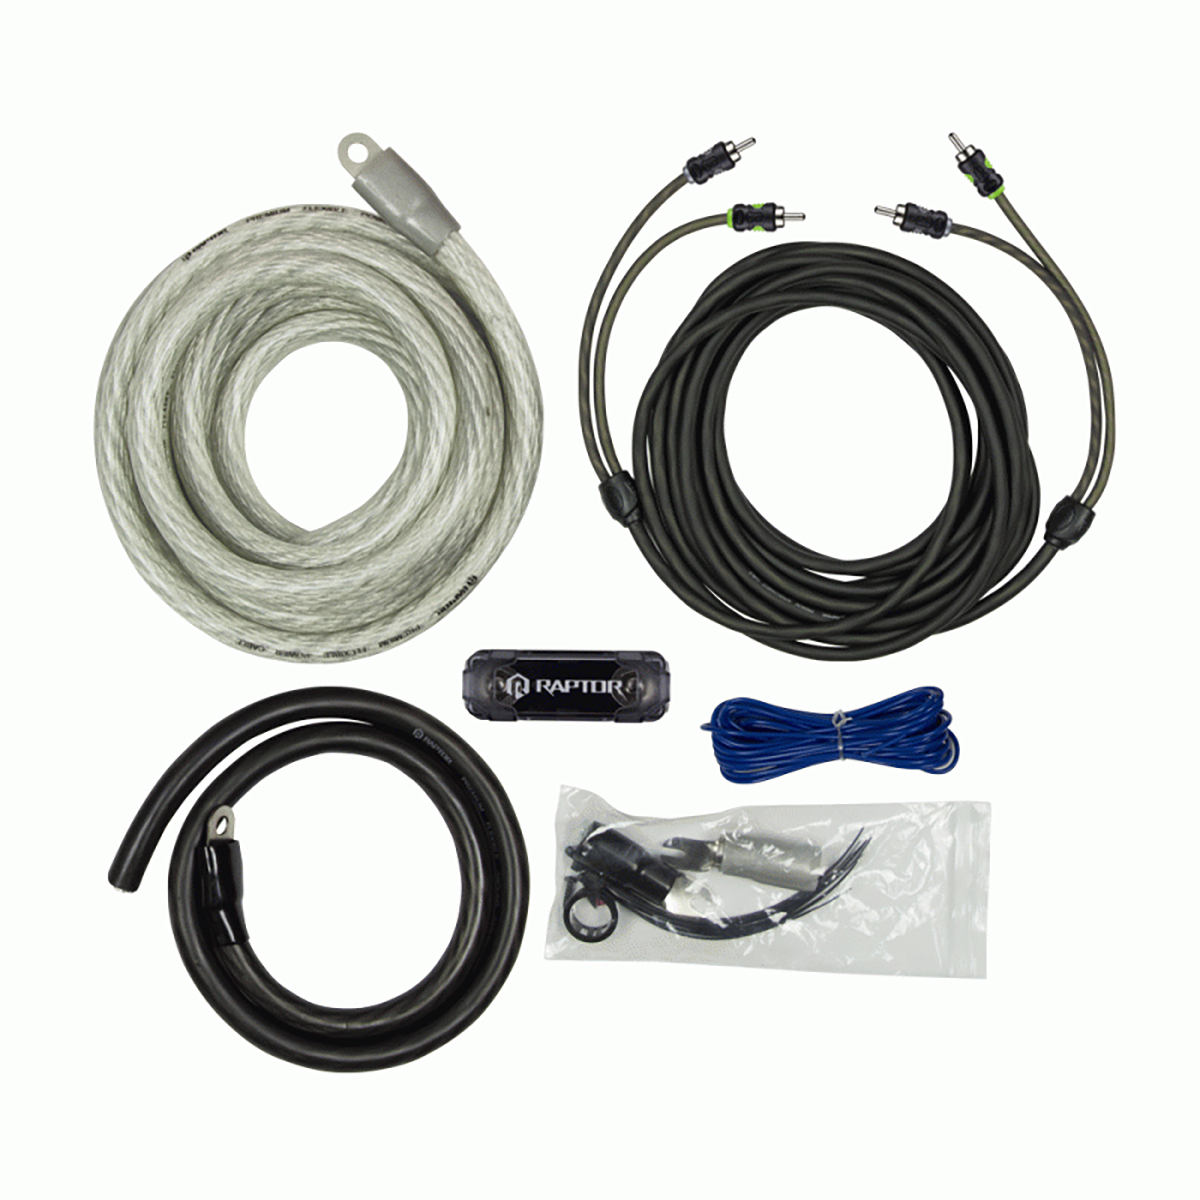 Raptor 1/0 Awg OFC Amp Kit 3800W With Rca Cable